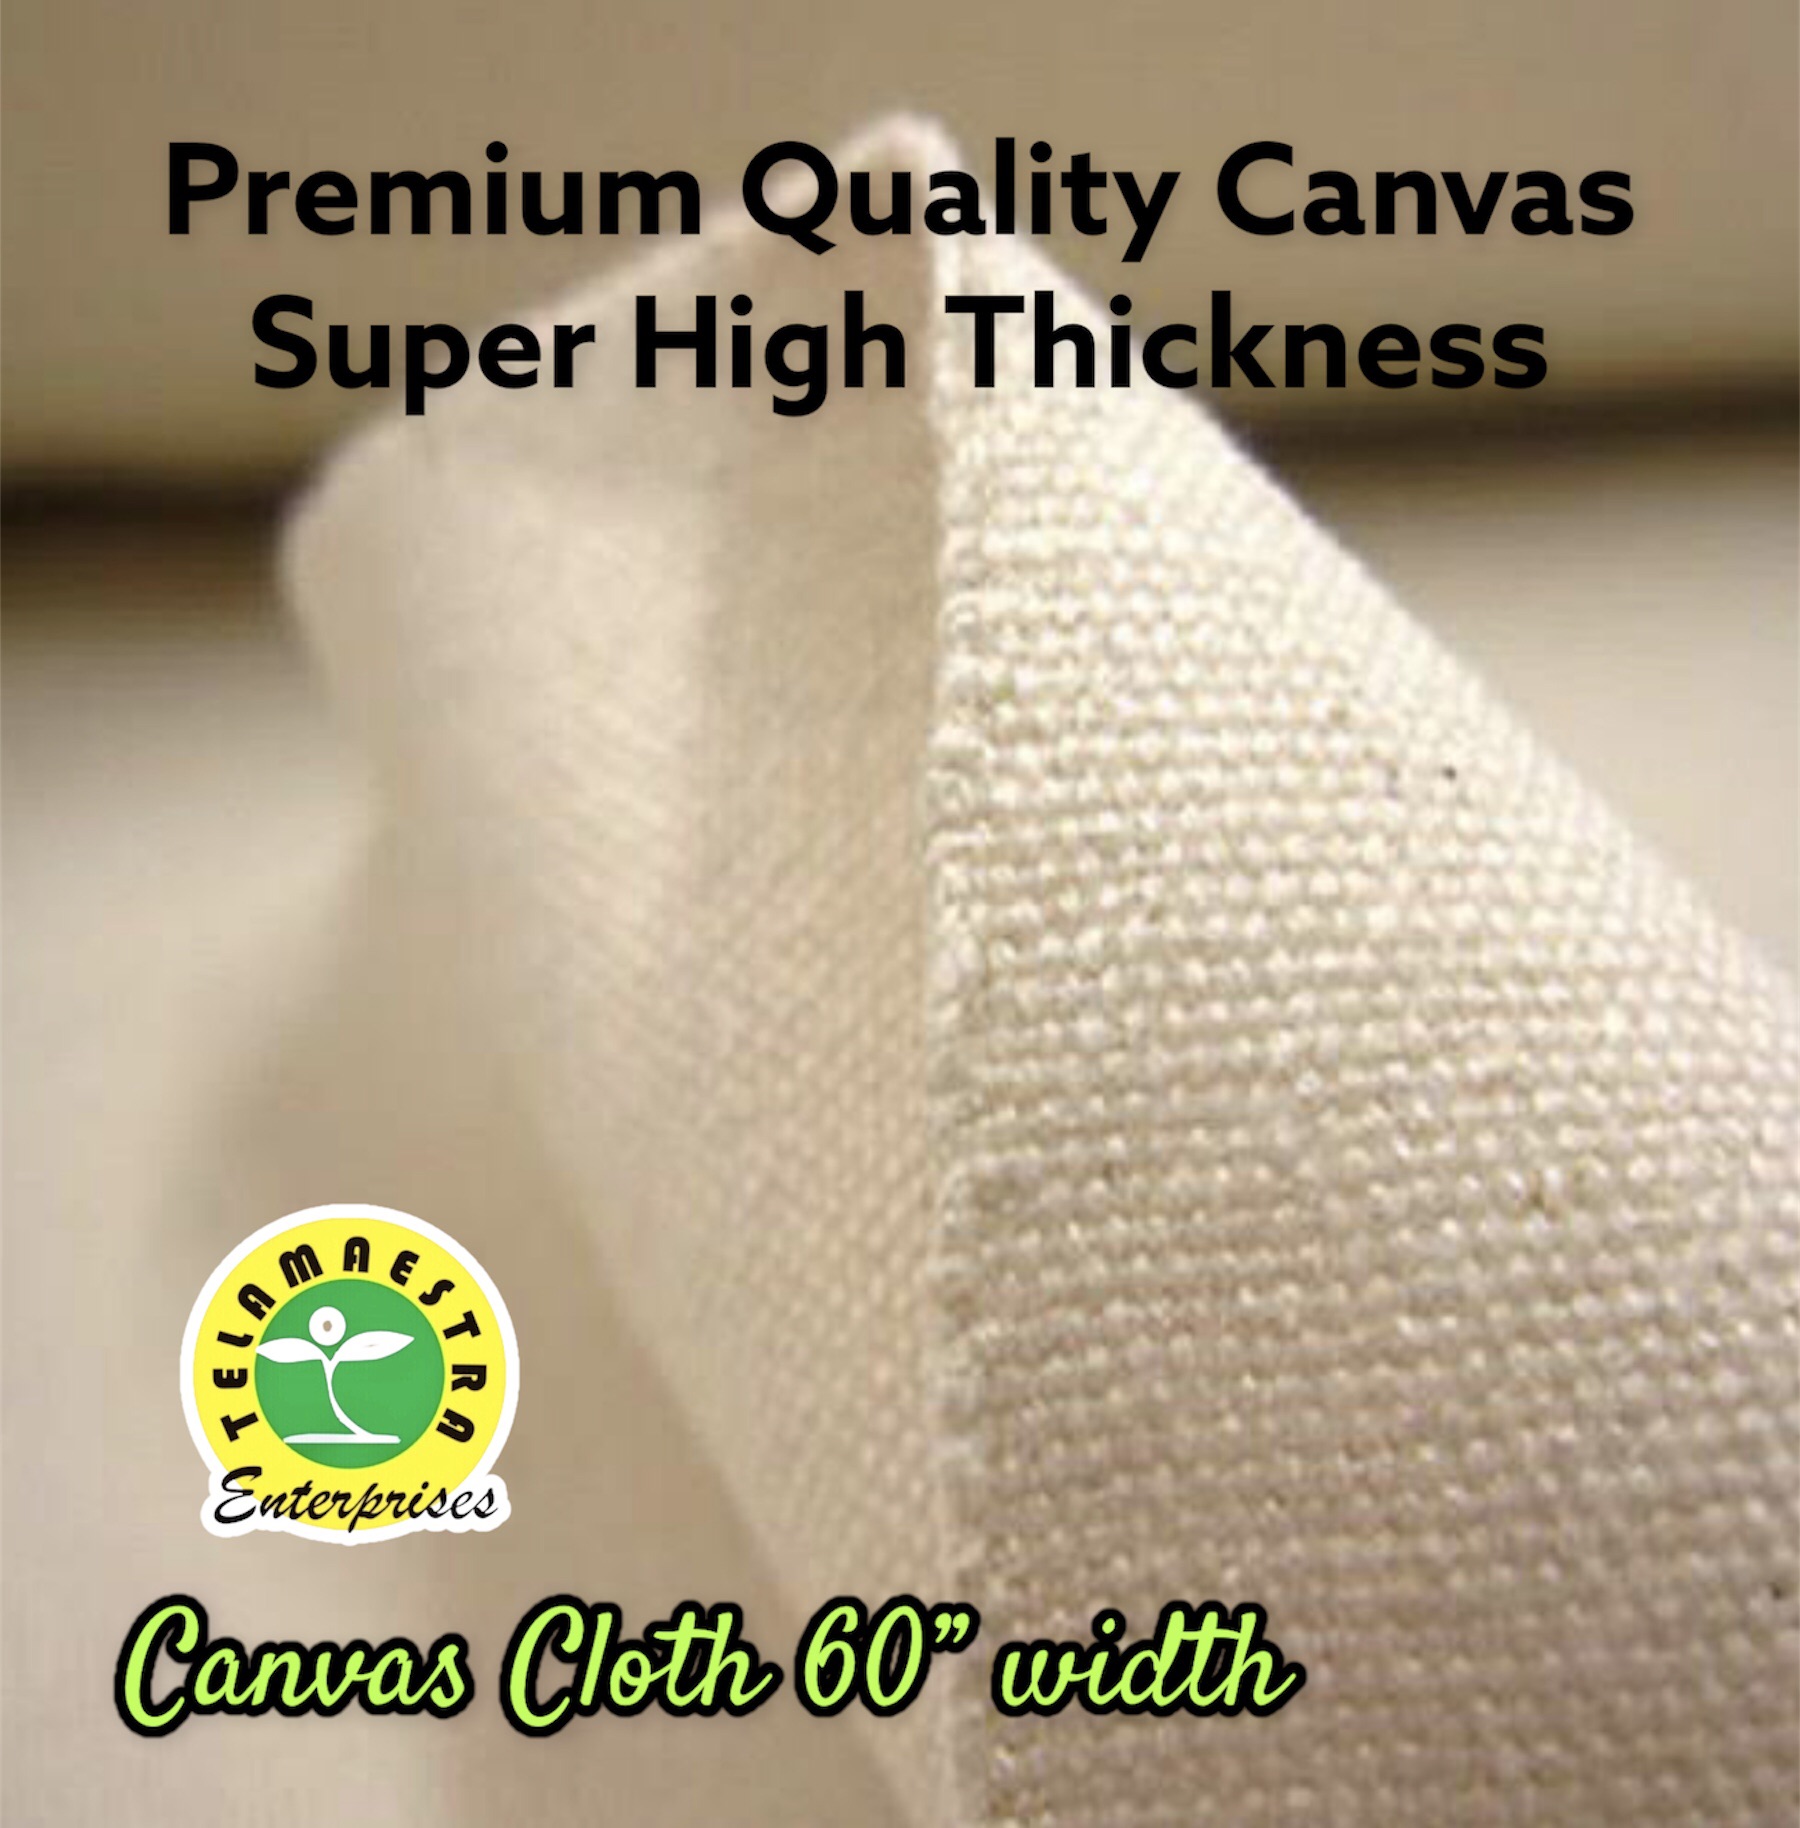 Professional Quality Canvas Fabric by Premium Canvass Co